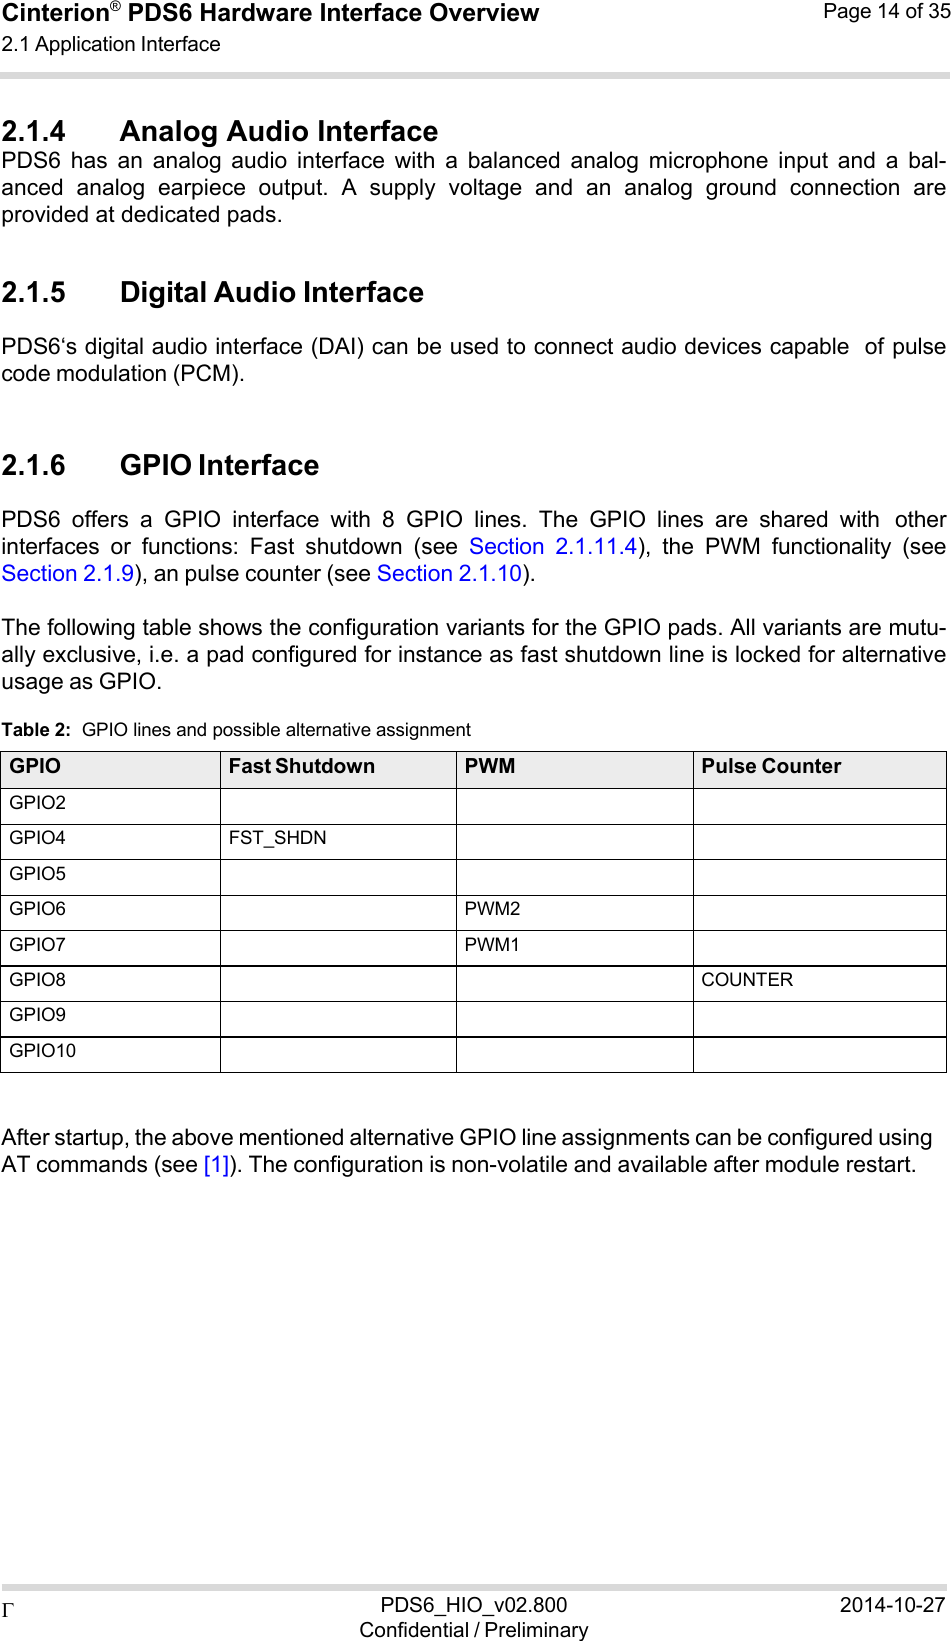  PDS6_HIO_v02.800Confidential / Preliminary2014-10-27Cinterion®  PDS6 Hardware Interface Overview 2.1 Application Interface Page 14 of 35   2.1.4 Analog Audio Interface PDS6  has  an  analog  audio  interface  with  a  balanced  analog  microphone  input  and  a  bal- anced  analog  earpiece  output.  A  supply  voltage  and  an  analog  ground  connection  are provided at dedicated pads.  2.1.5 Digital Audio Interface PDS6‘s digital audio interface (DAI) can be used to connect audio devices capable of pulse code modulation (PCM).   2.1.6 GPIO Interface PDS6  offers  a  GPIO  interface  with  8  GPIO  lines.  The  GPIO  lines  are  shared  with other interfaces  or  functions:  Fast  shutdown  (see  Section  2.1.11.4),  the  PWM  functionality  (see Section 2.1.9), an pulse counter (see Section 2.1.10).  The following table shows the configuration variants for the GPIO pads. All variants are mutu- ally exclusive, i.e. a pad configured for instance as fast shutdown line is locked for alternative usage as GPIO.  Table 2:  GPIO lines and possible alternative assignment  GPIO Fast Shutdown PWM Pulse Counter GPIO2    GPIO4 FST_SHDN   GPIO5    GPIO6  PWM2  GPIO7  PWM1  GPIO8    COUNTER GPIO9    GPIO10      After startup, the above mentioned alternative GPIO line assignments can be configured using AT commands (see [1]). The configuration is non-volatile and available after module restart. 